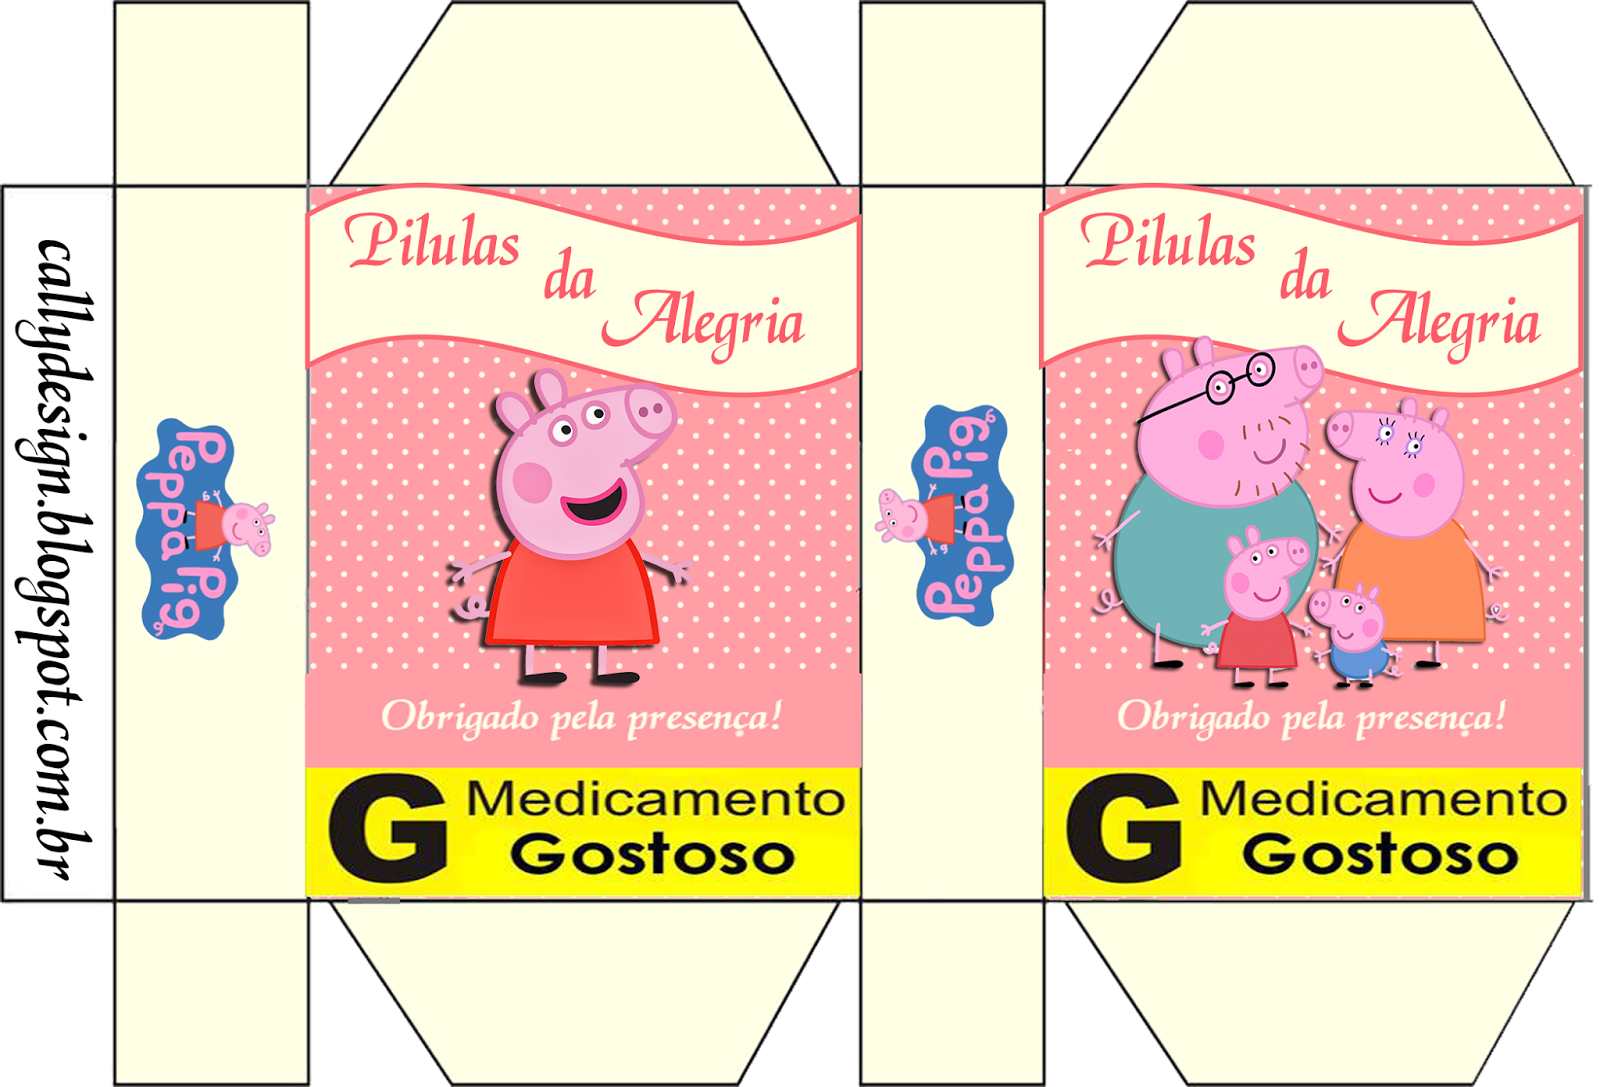 Peppa Pig Birthday Free Printable Cake Toppers. - Oh My Fiesta! in english